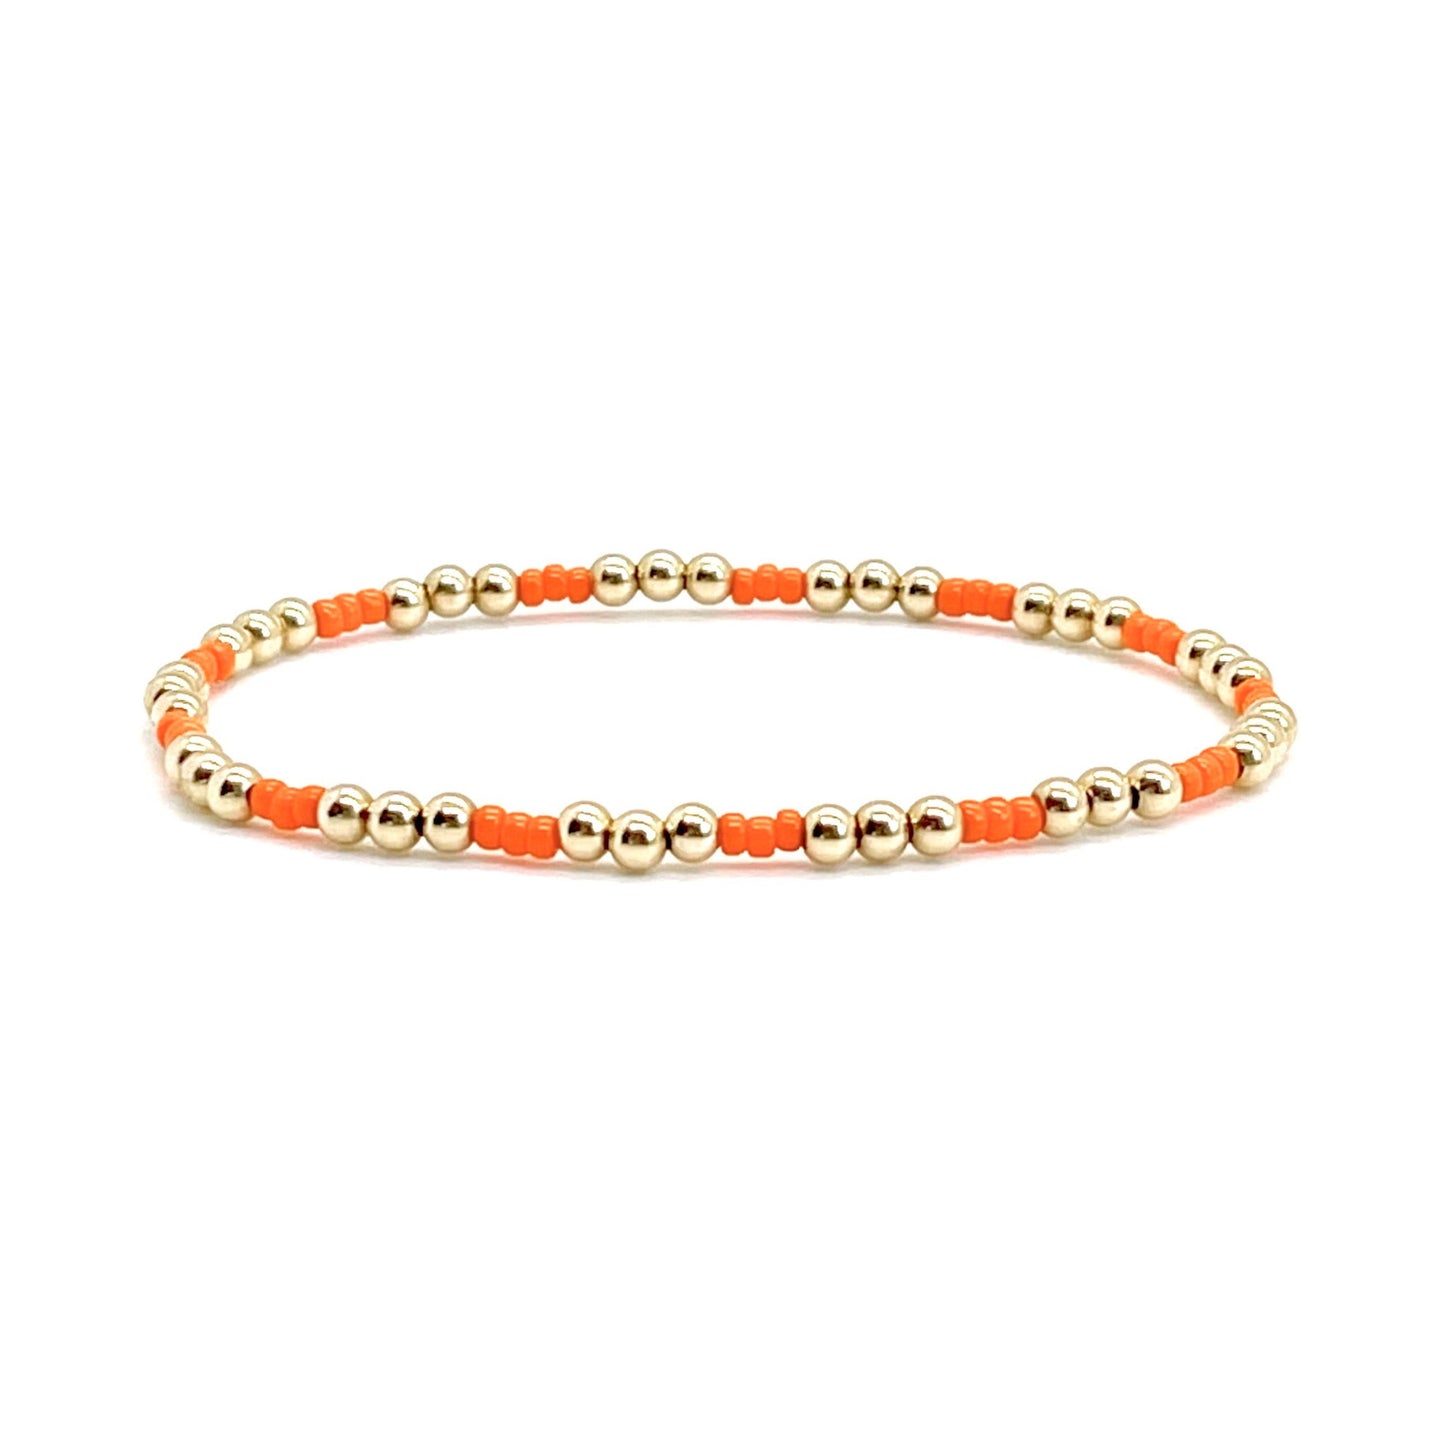 Orange seed bead bracelet with 3mm round gold filled beads on stretch cord.